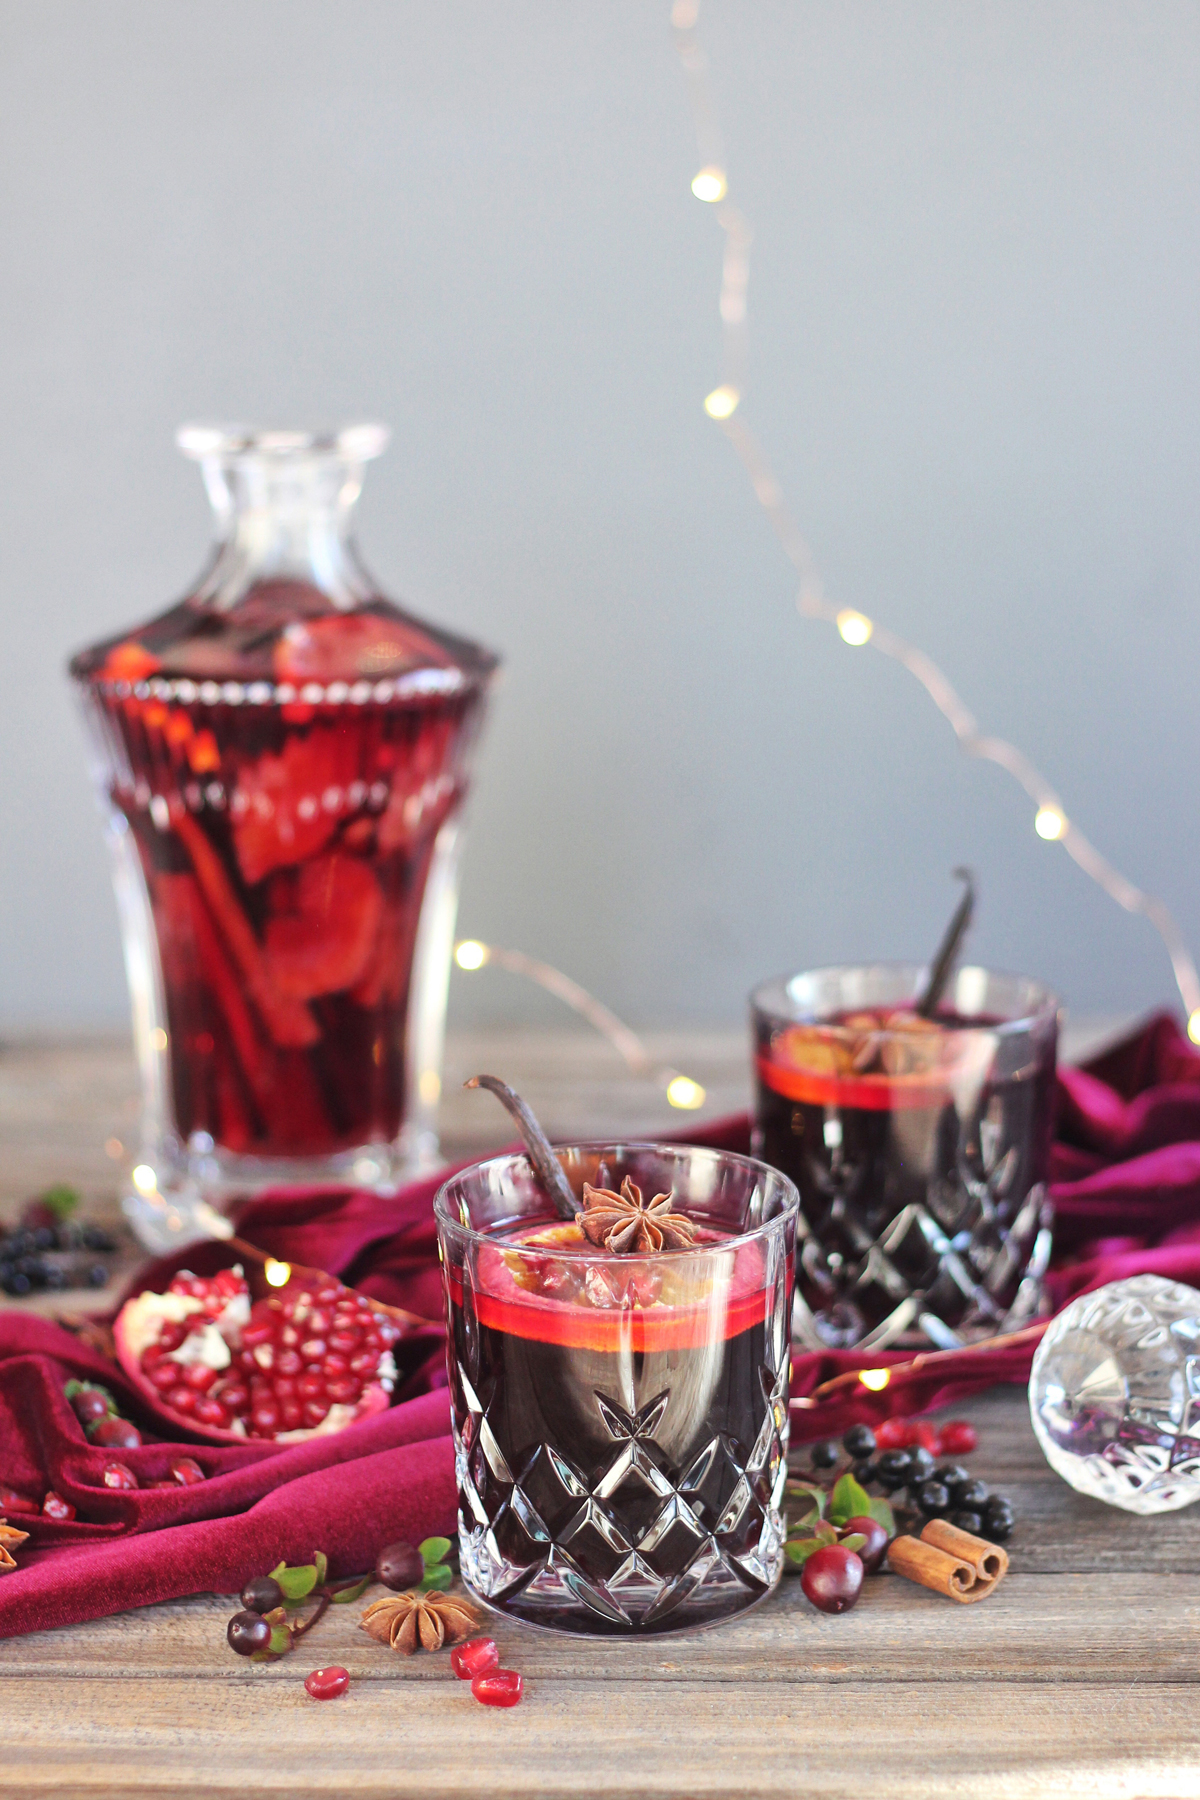 5 Cozy Fall Cocktail and Sangria Recipes | JustineCelina’s Best Fall Cocktail and Sangria Recipes | Vanilla Pomegranate Mulled Wine | Warm Cocktails for Fall l Modern Holiday Mulled Wine Recipe | Pomegranate Cocktails for Fall | Warm Alcoholic Drinks for Fall | Fall Party Drinks | Fall Cocktails for a Crowd | Fall Cocktails for a Party | Cocktail Photographer and Stylist | Calgary Blogger // JustineCelina.com